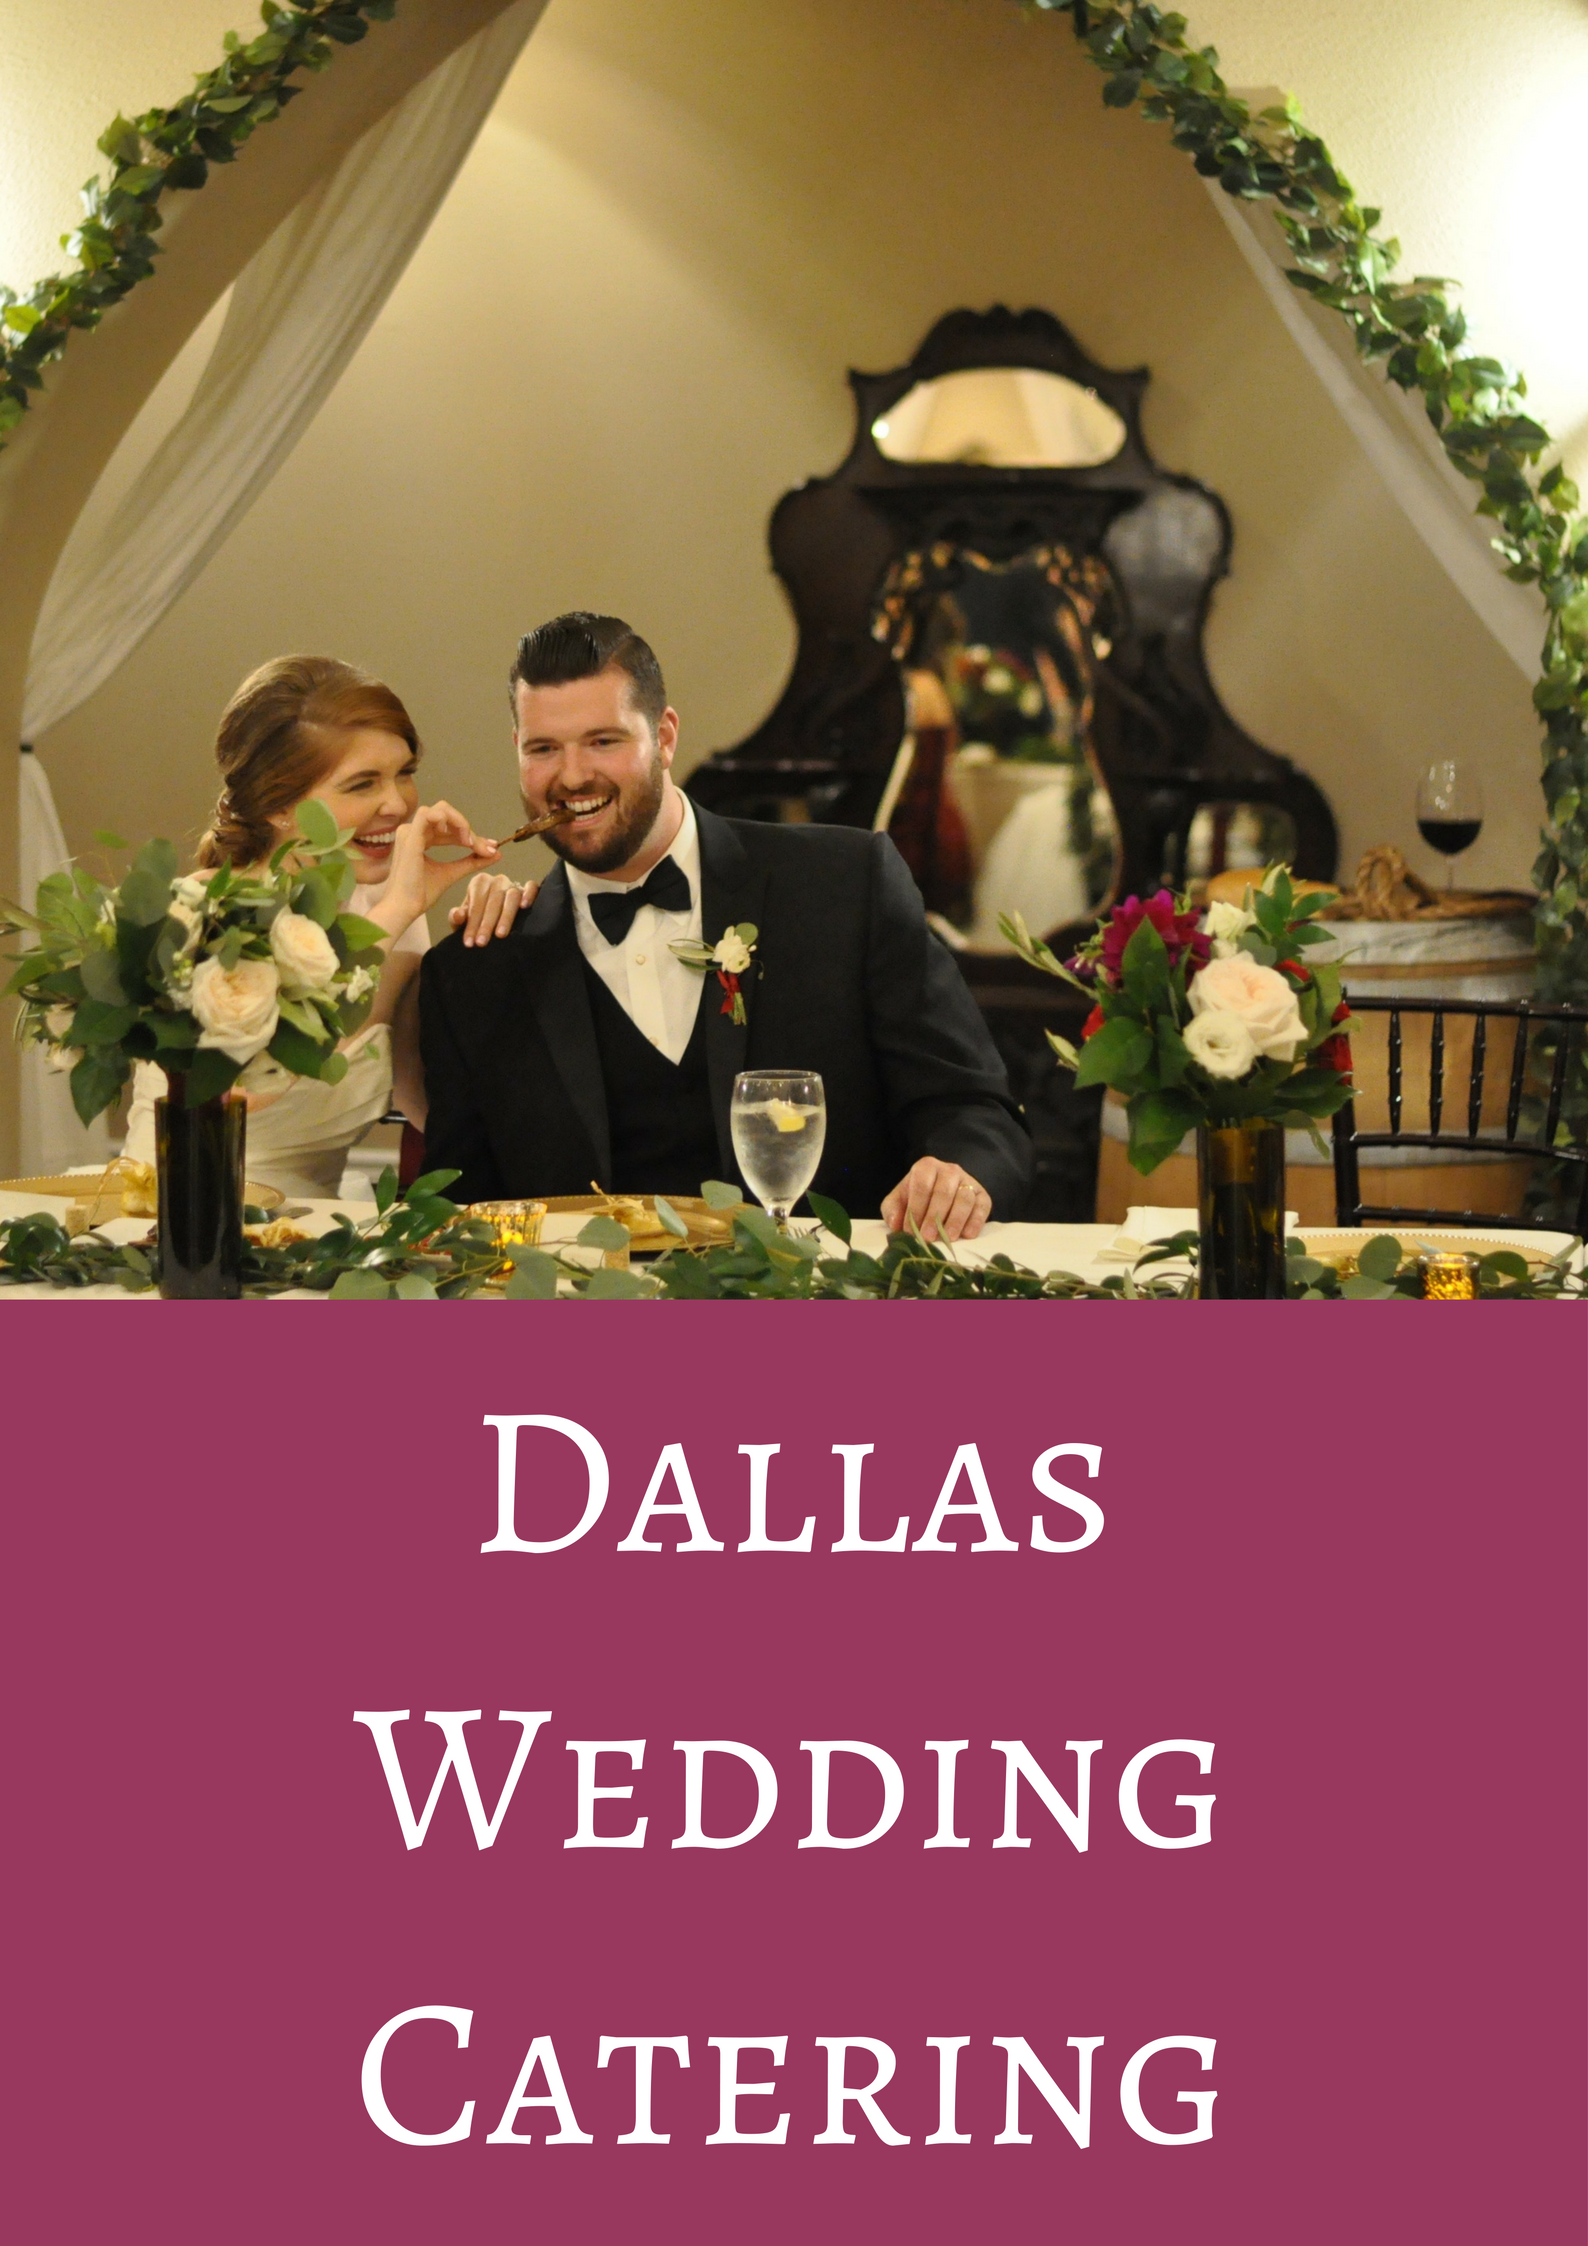 dallas wedding catering, culinary art catering, wedding food, dallas wedding, wedding tips, buffet dinner, plated dinner, stations, the castle at rockwall, married, marriage